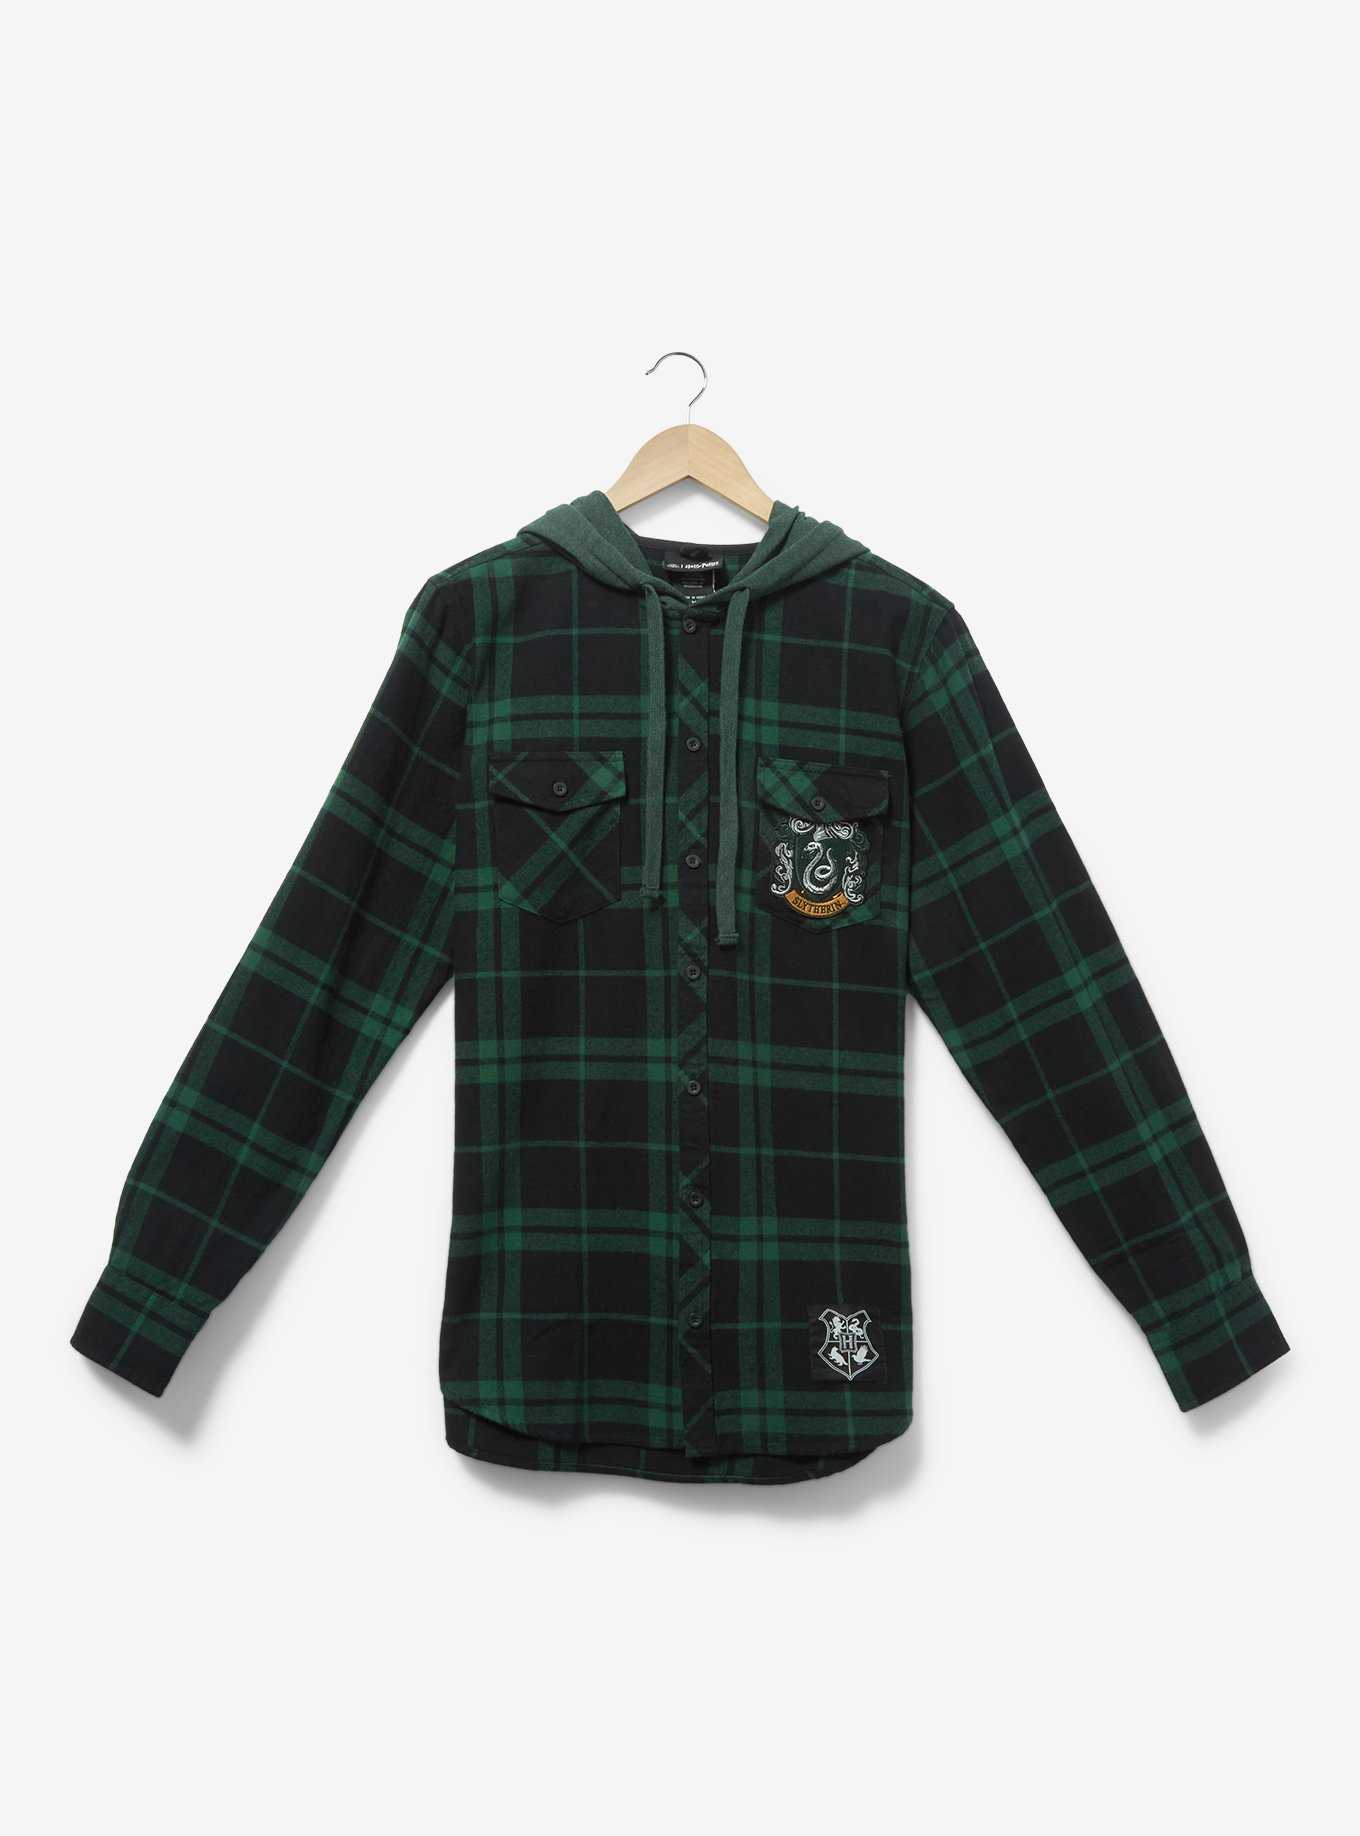 Harry Potter - Apparel, Décor, & Gifts